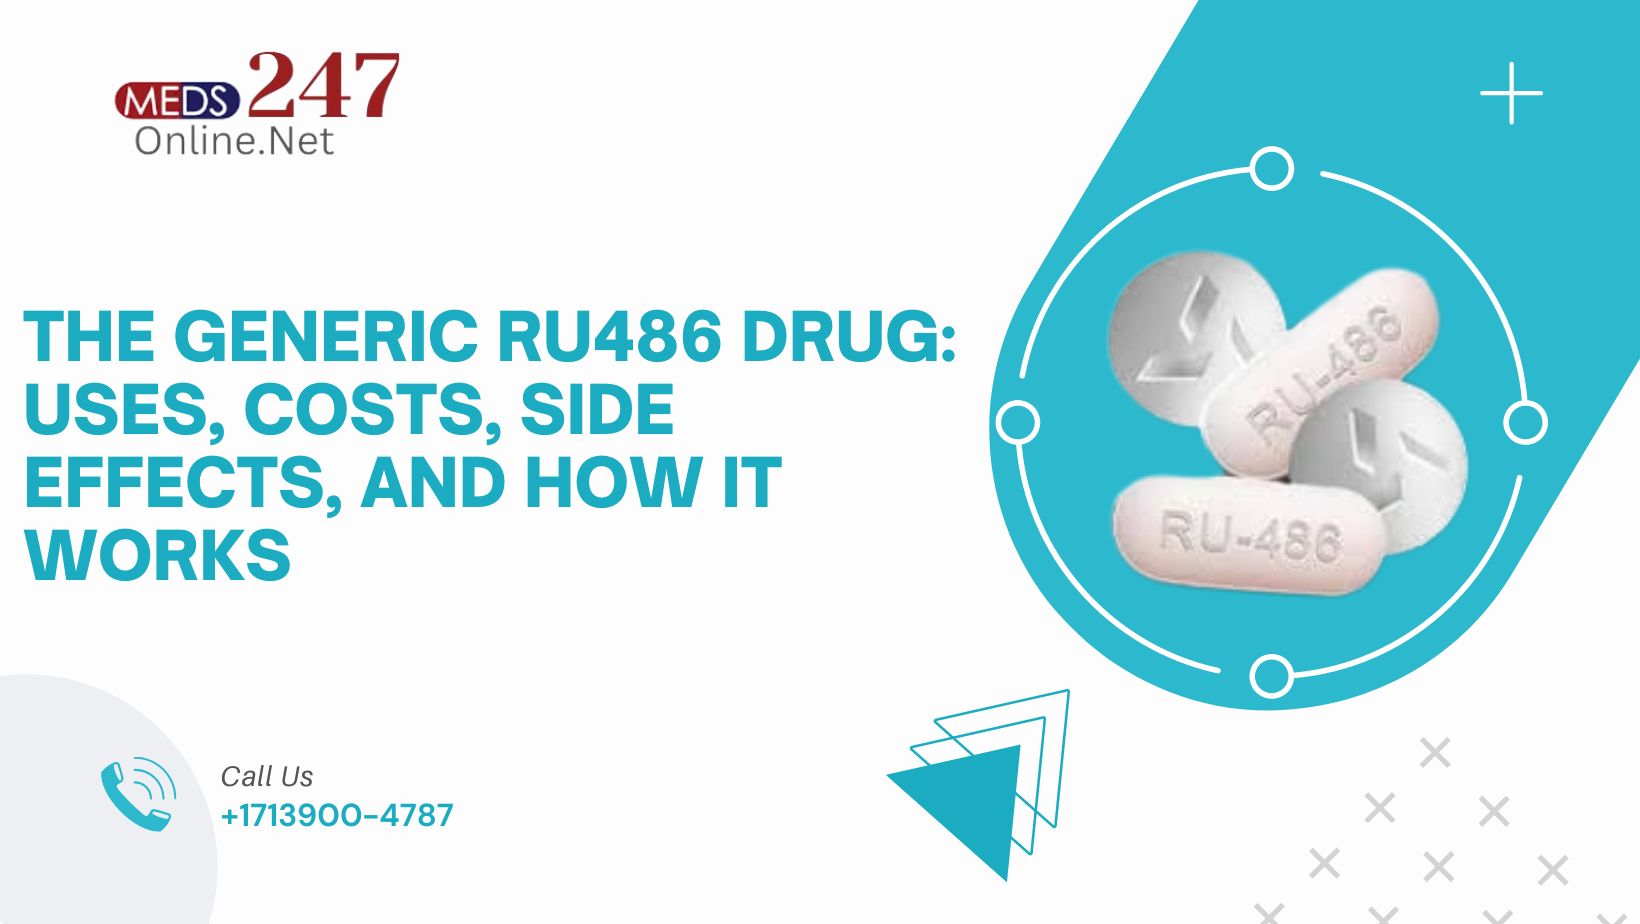 The generic RU486 drug: uses, costs, side effects, and how it works